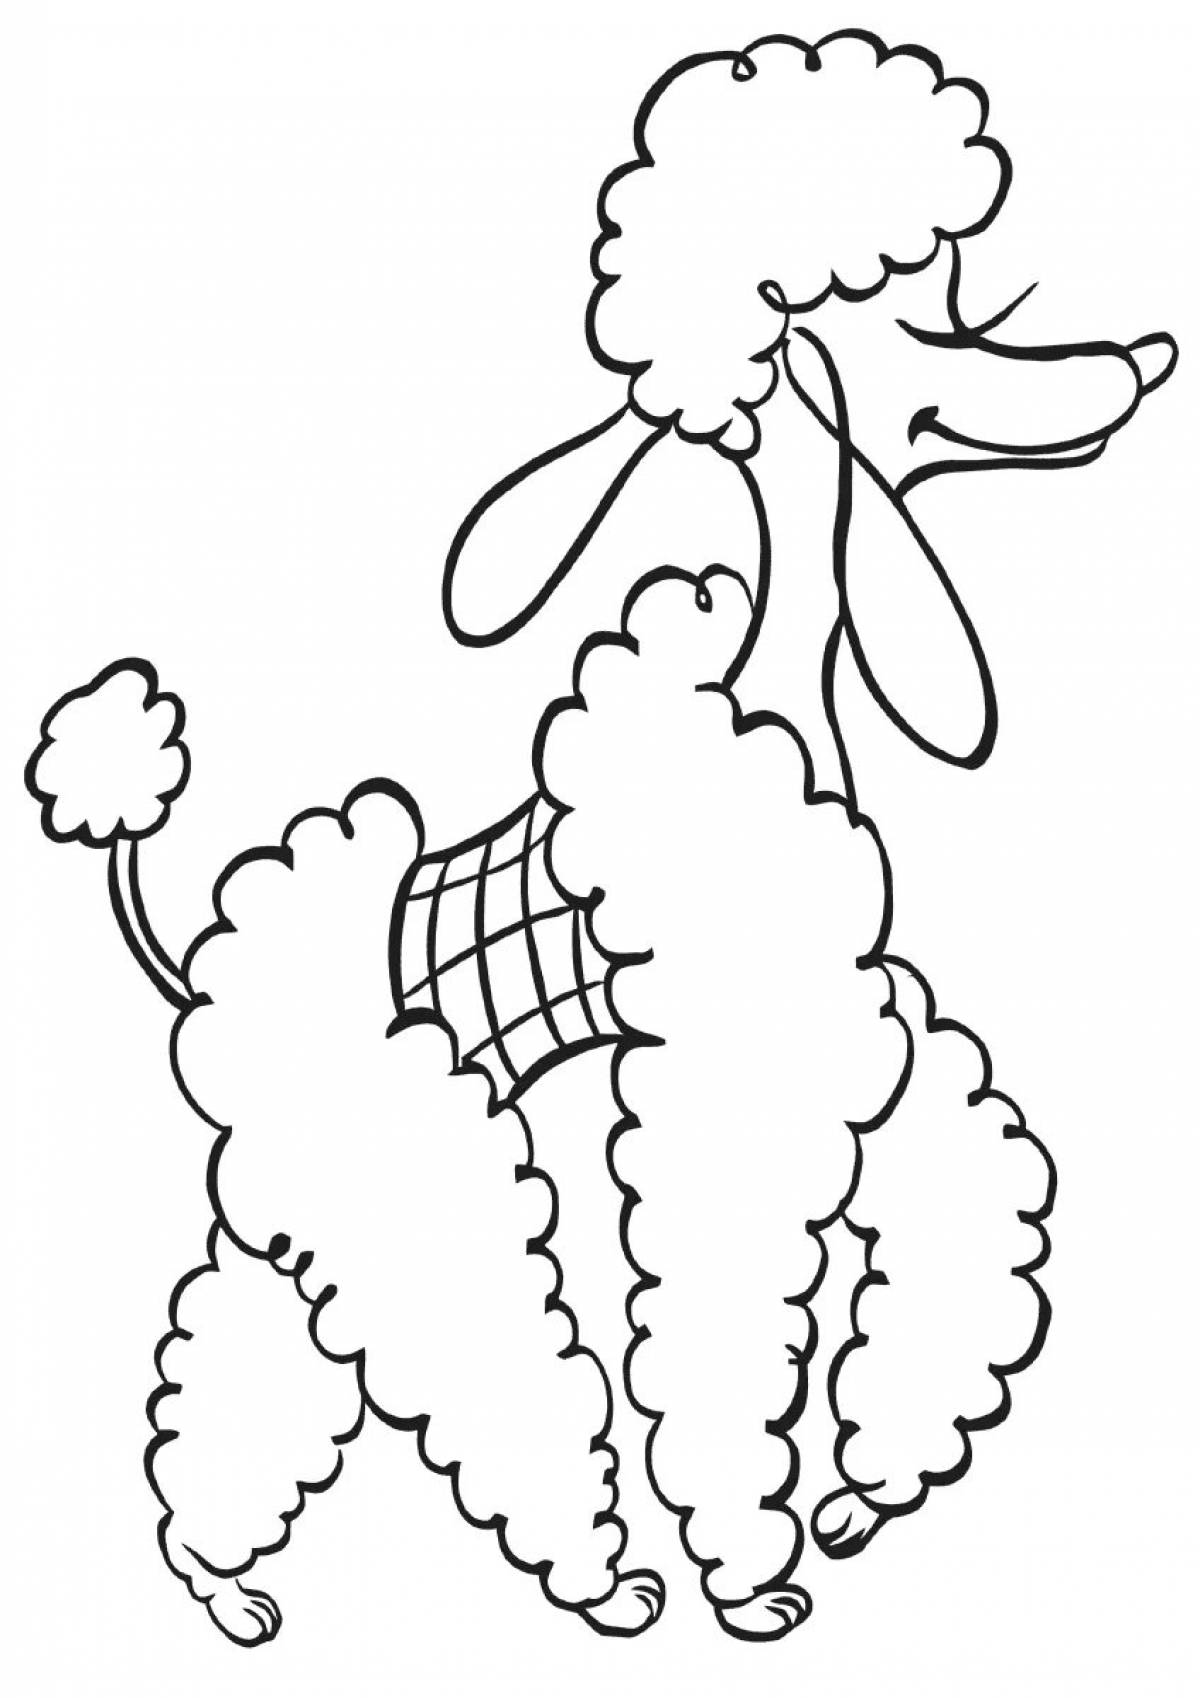 Gorgeous poodle coloring page for kids